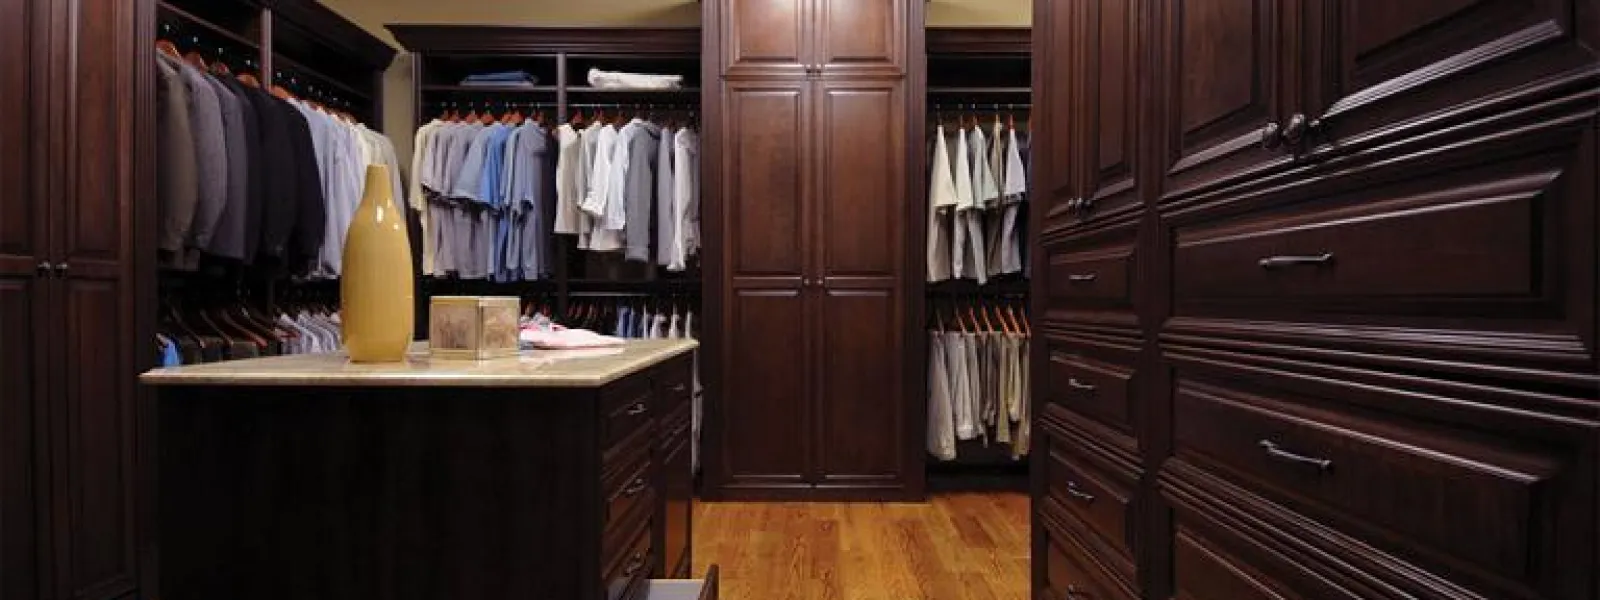 Closet Organization Tips for Fall and Winter Apparel